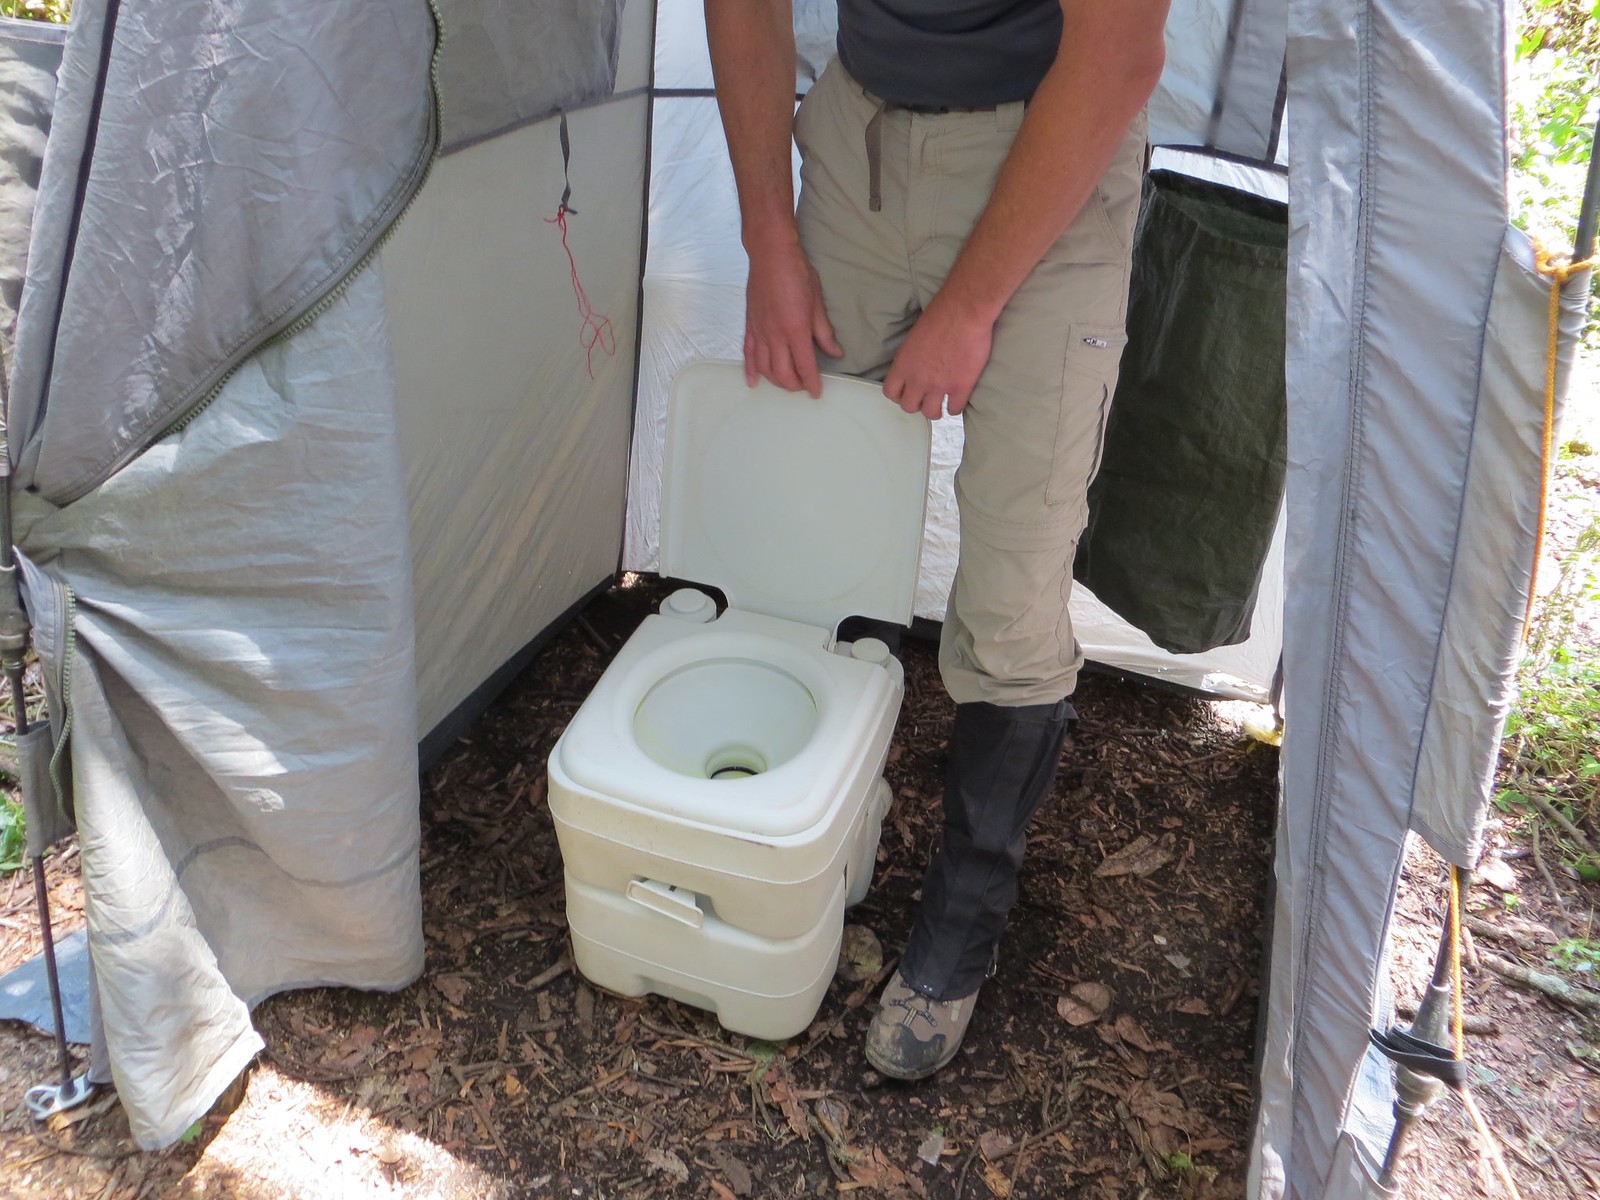 Inside the private toilets of Mount Kilimanjaro